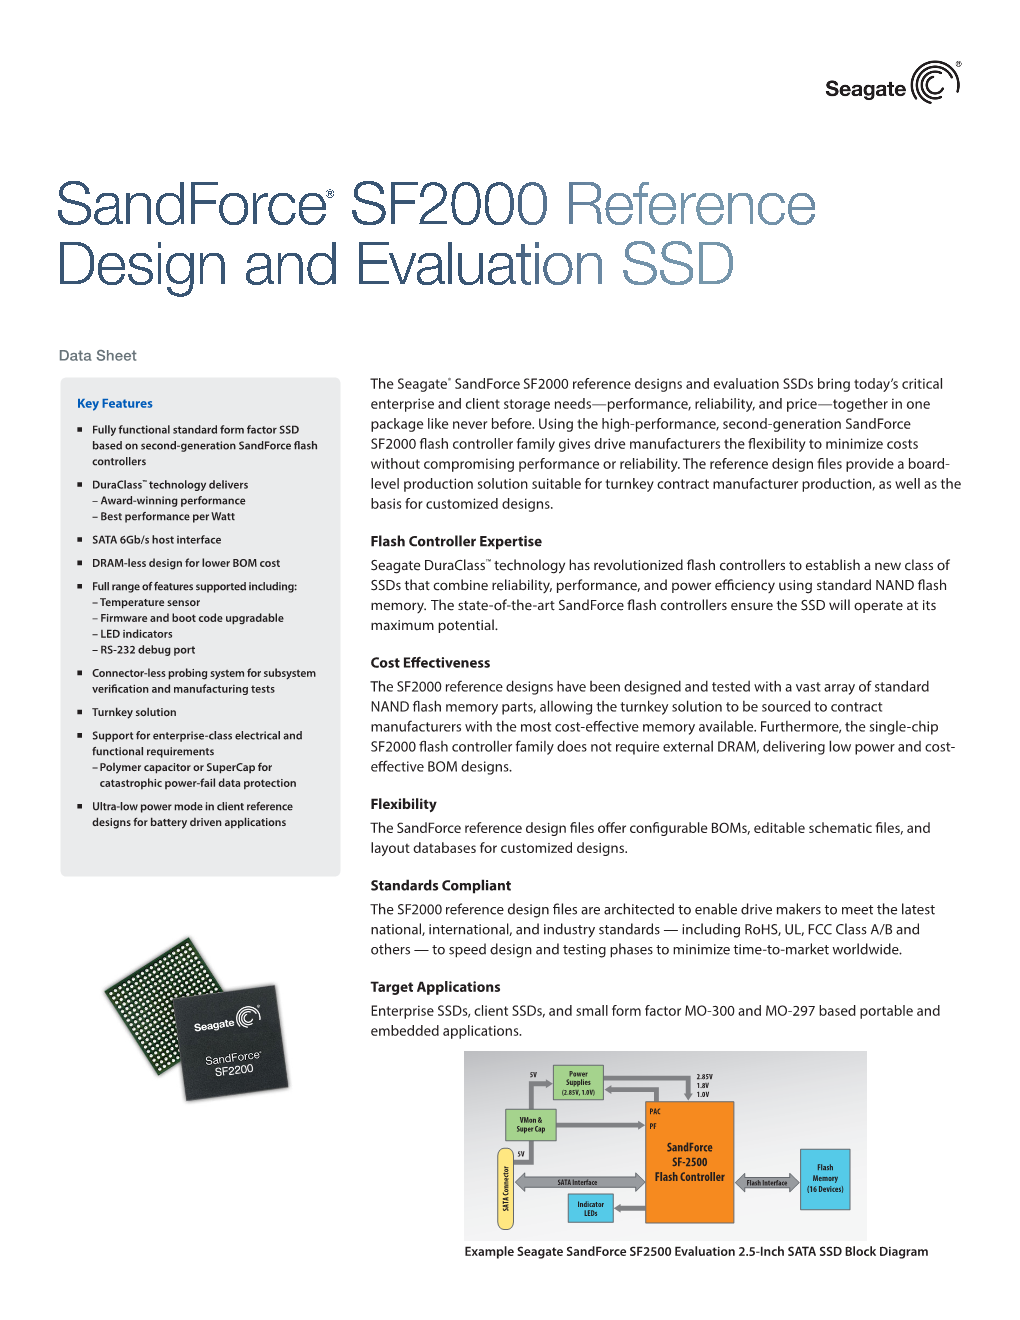 Sandforce® SF2000 Reference Design and Evaluation SSD